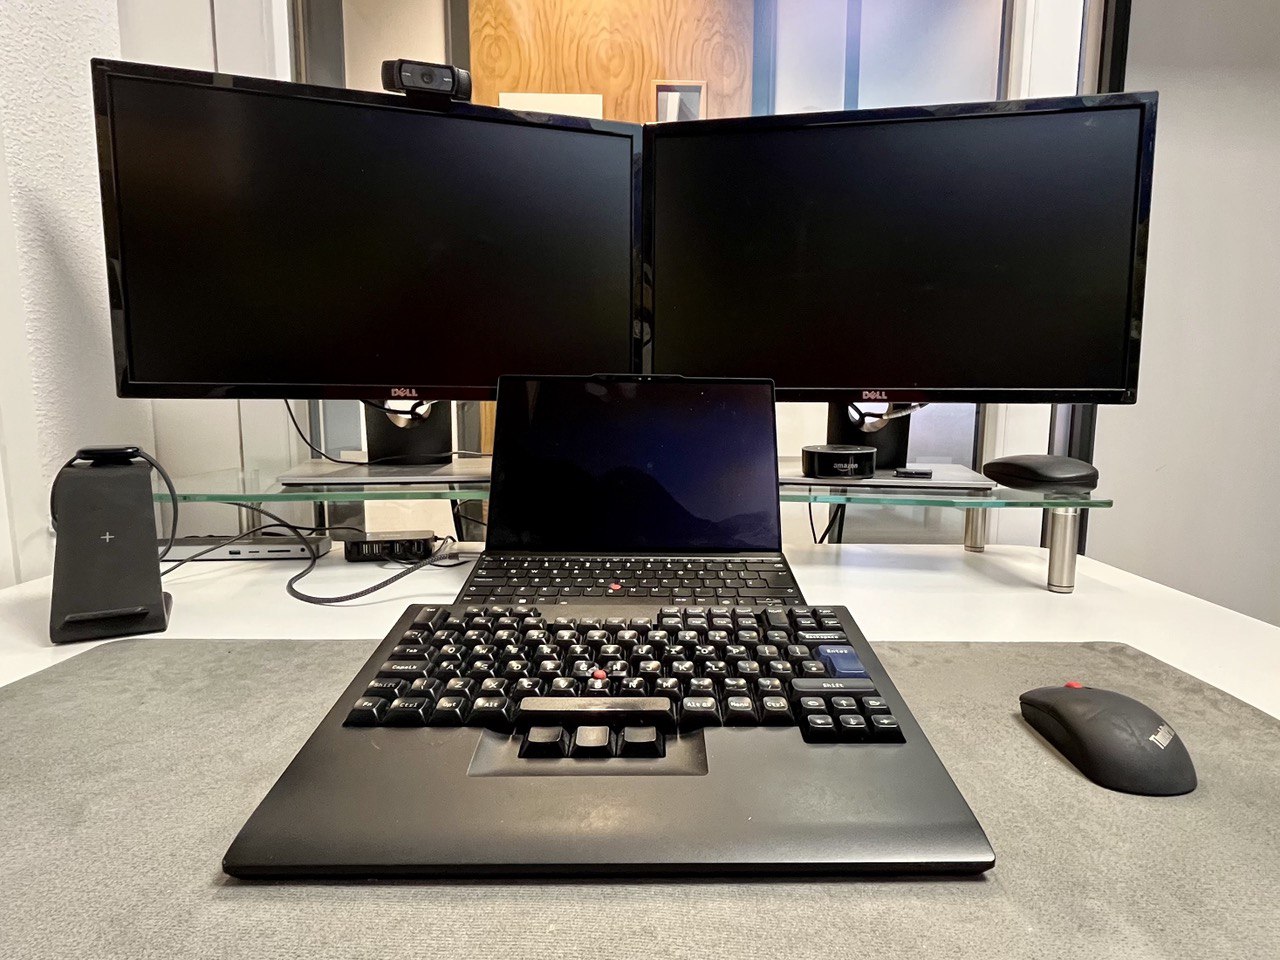 ThinkPad Z13 with two external screens off